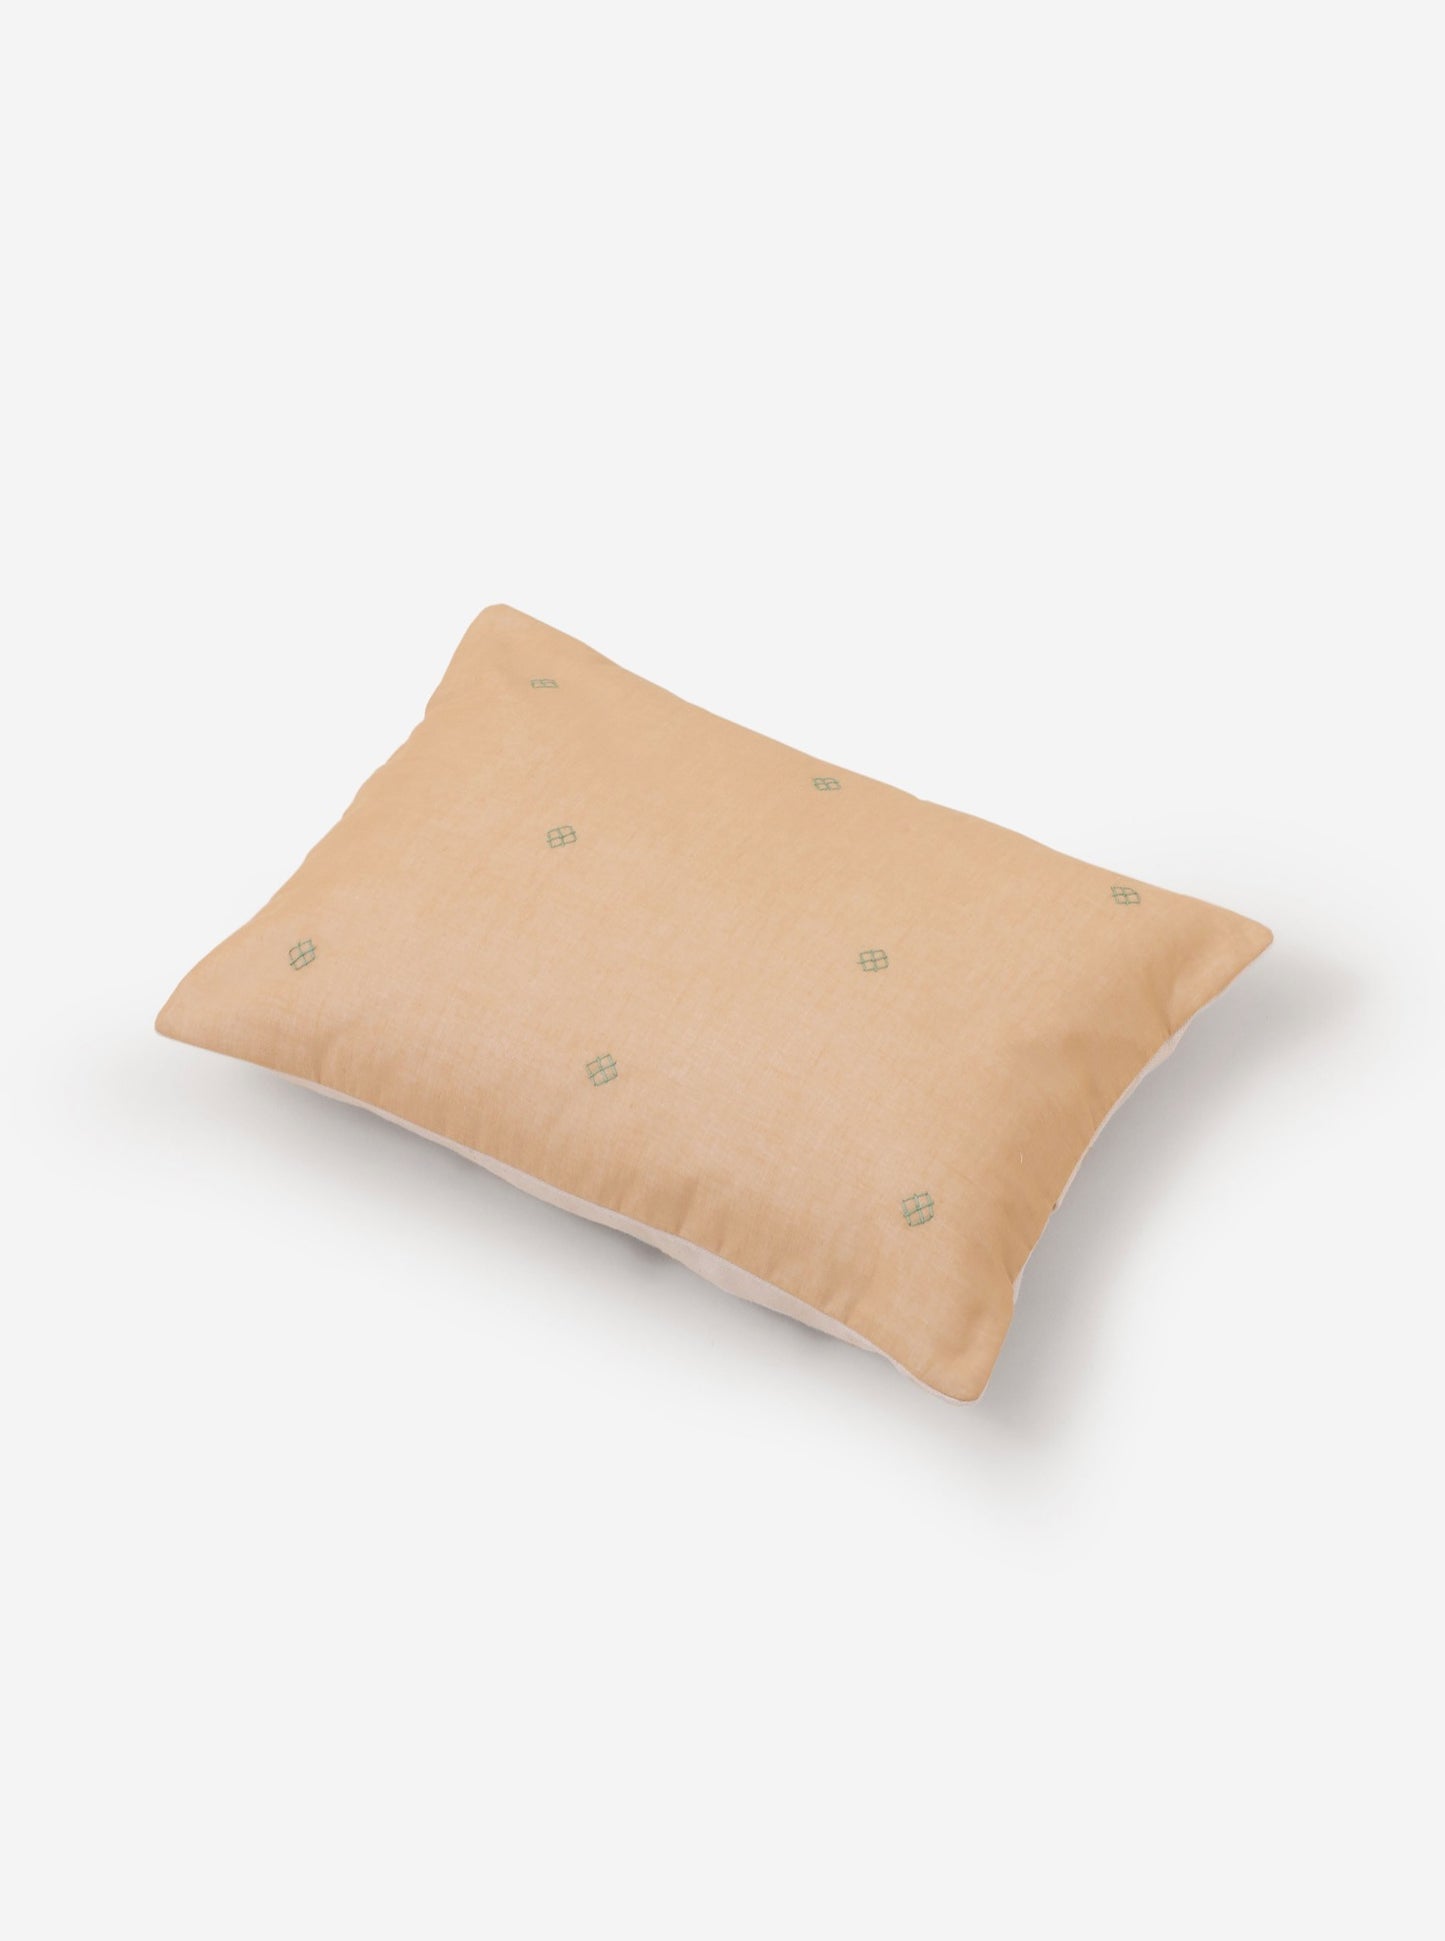 Wheat Bandook pillowcase with blue green embroidery 